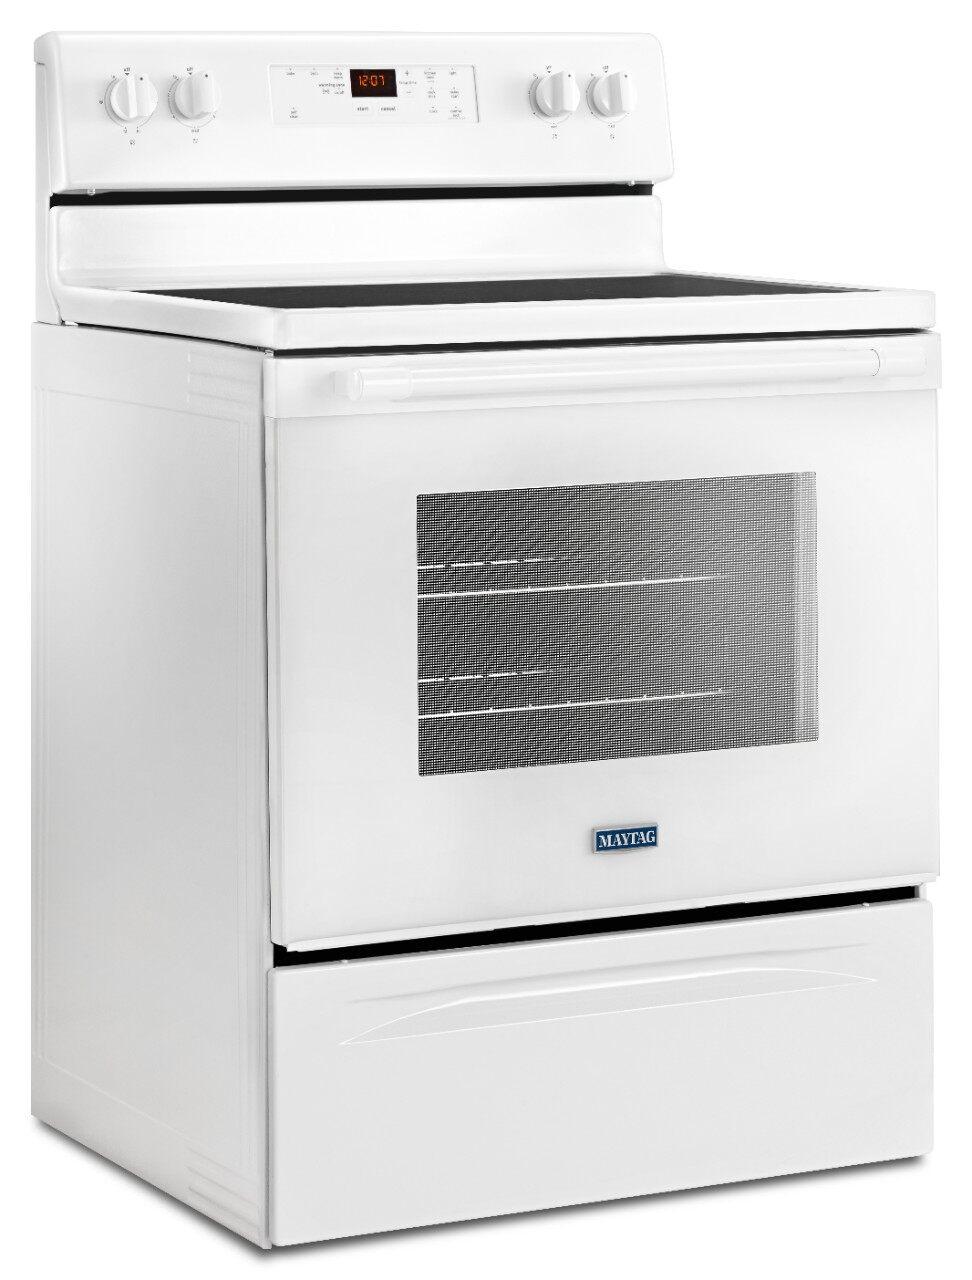 Maytag - 5.3 cu. ft  Electric Range in White - YMER6600FW